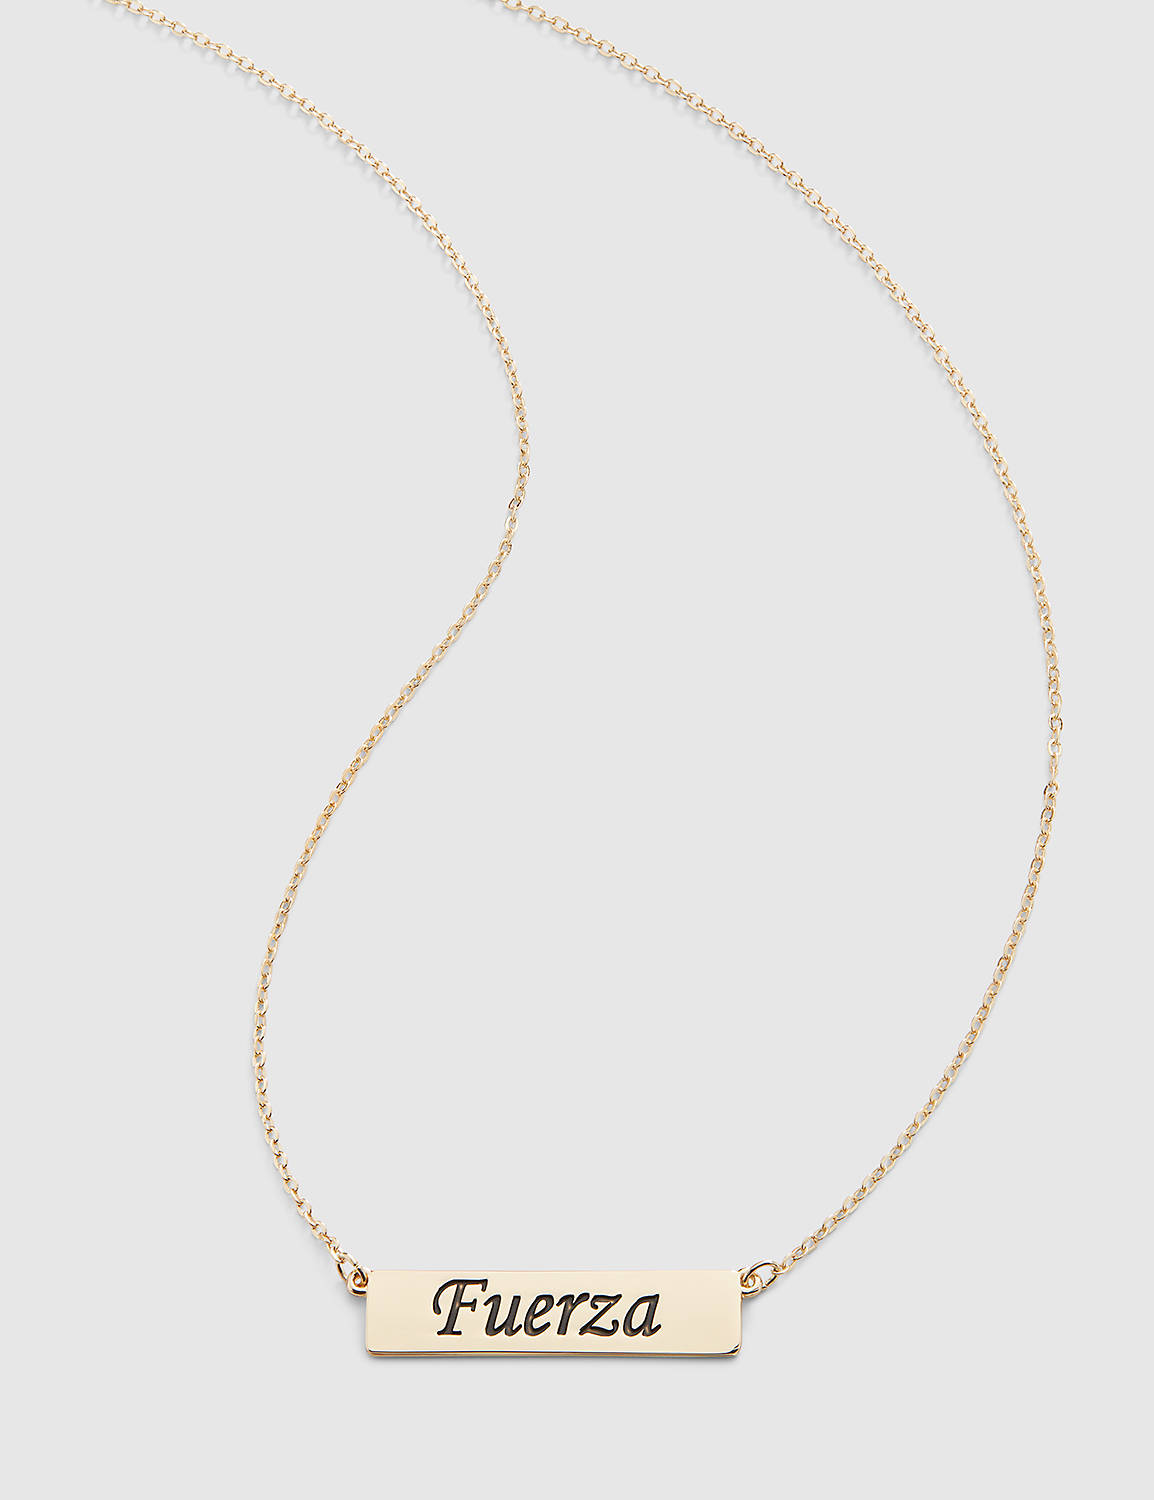 Fuerza- Strength Necklace:Gold Tone:ONESZ Product Image 1